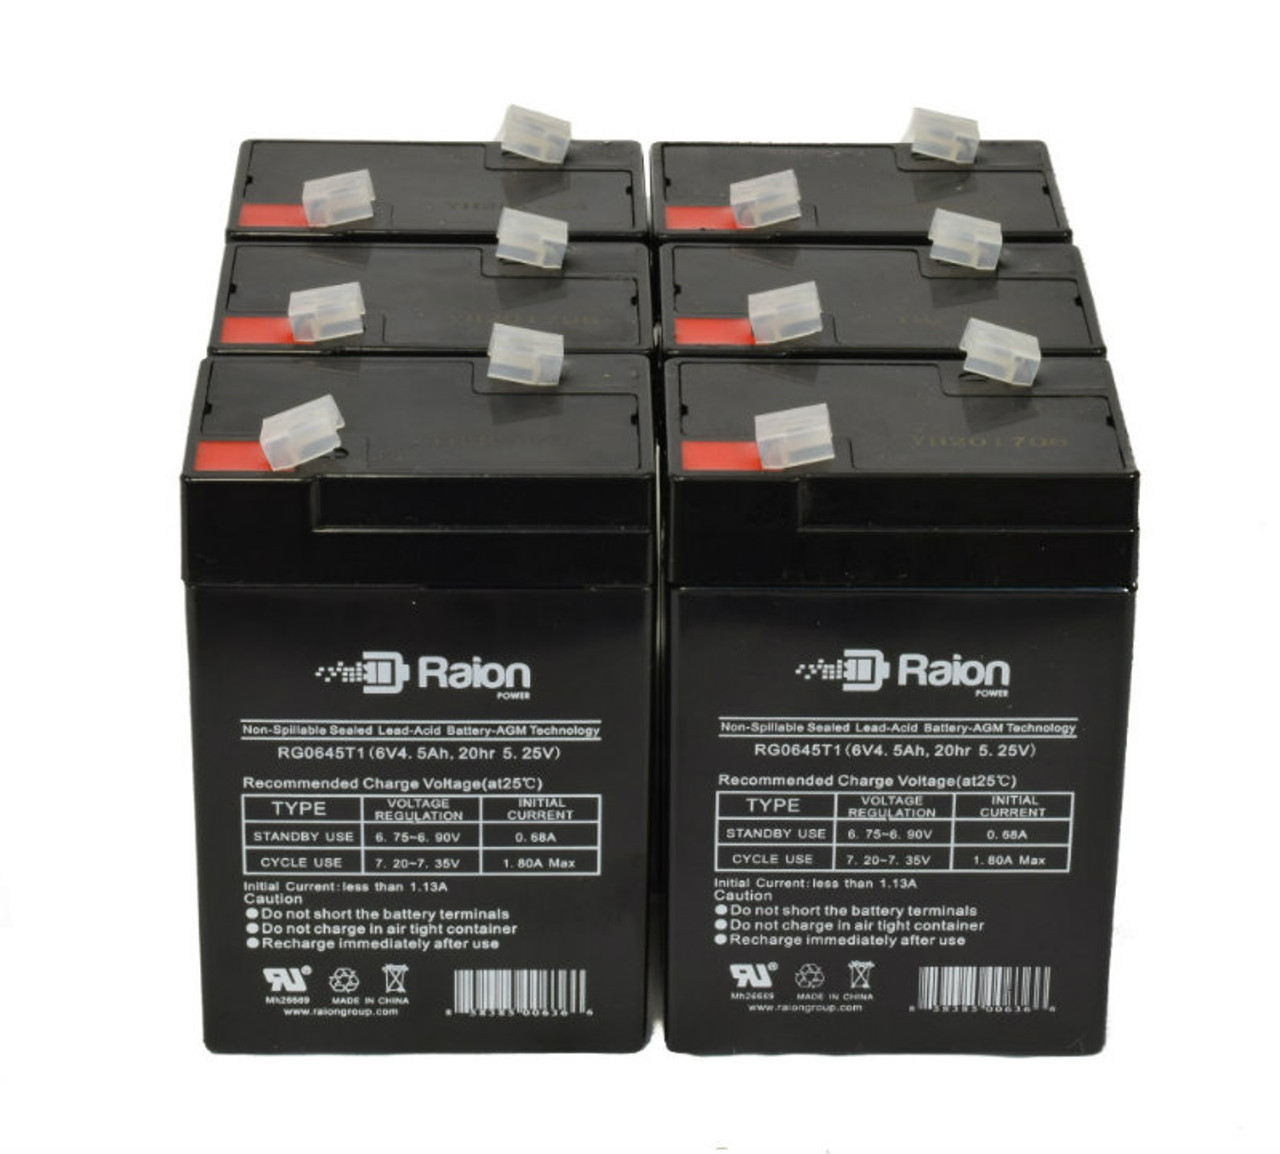 Raion Power 6 Volt 4.5Ah RG0645T1 Replacement Battery for AJC C4.5S - 6 Pack